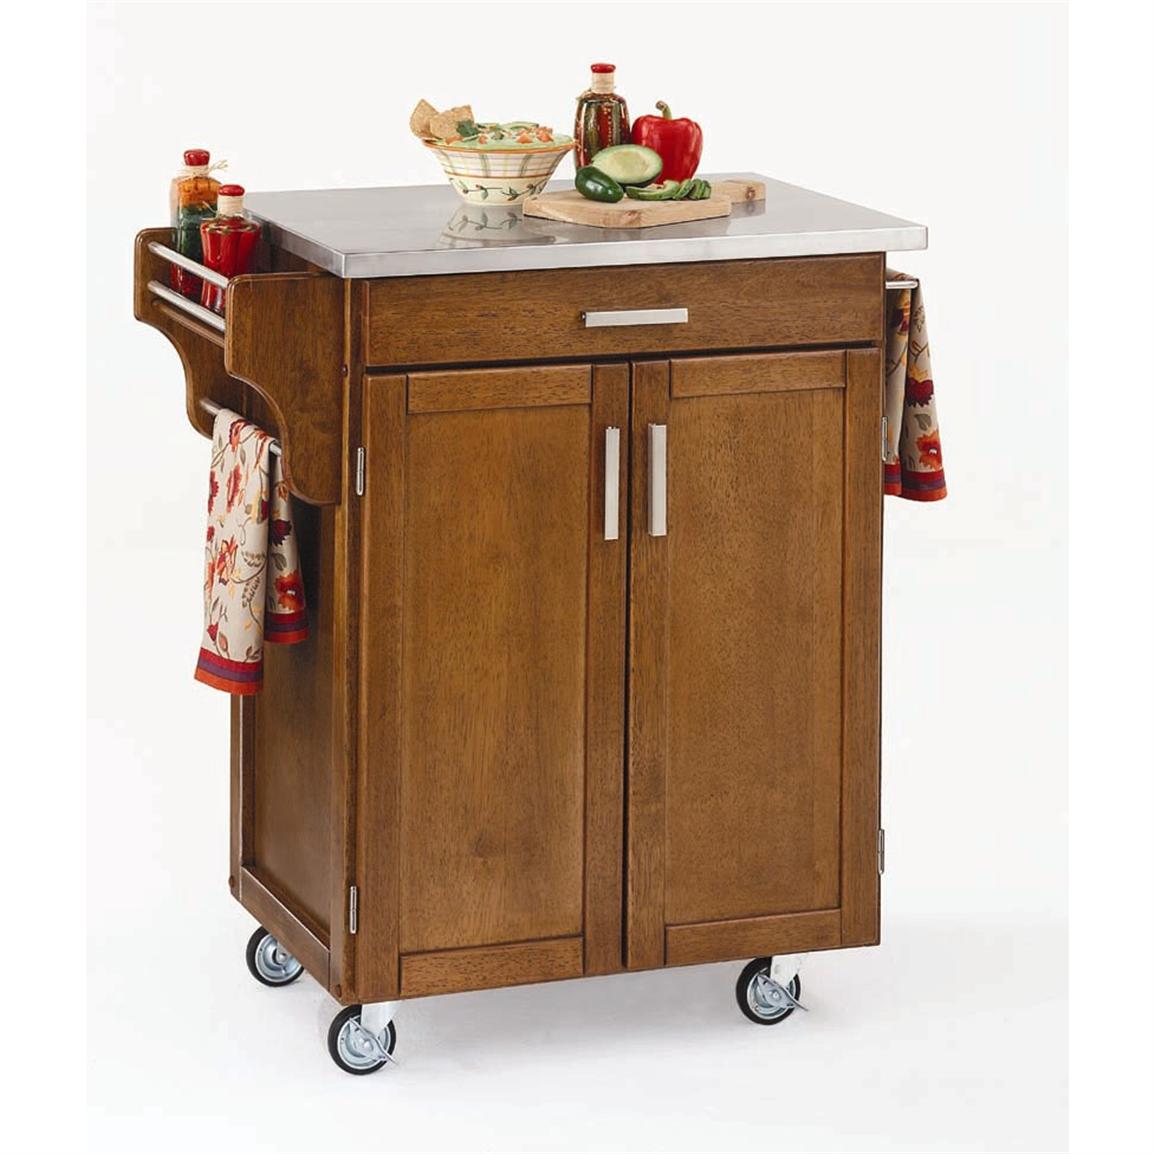 Home Styles™ Cottage Oak Kitchen Cart with Stainless Steel Top - 117979 Kitchen Cart Stainless Steel Top